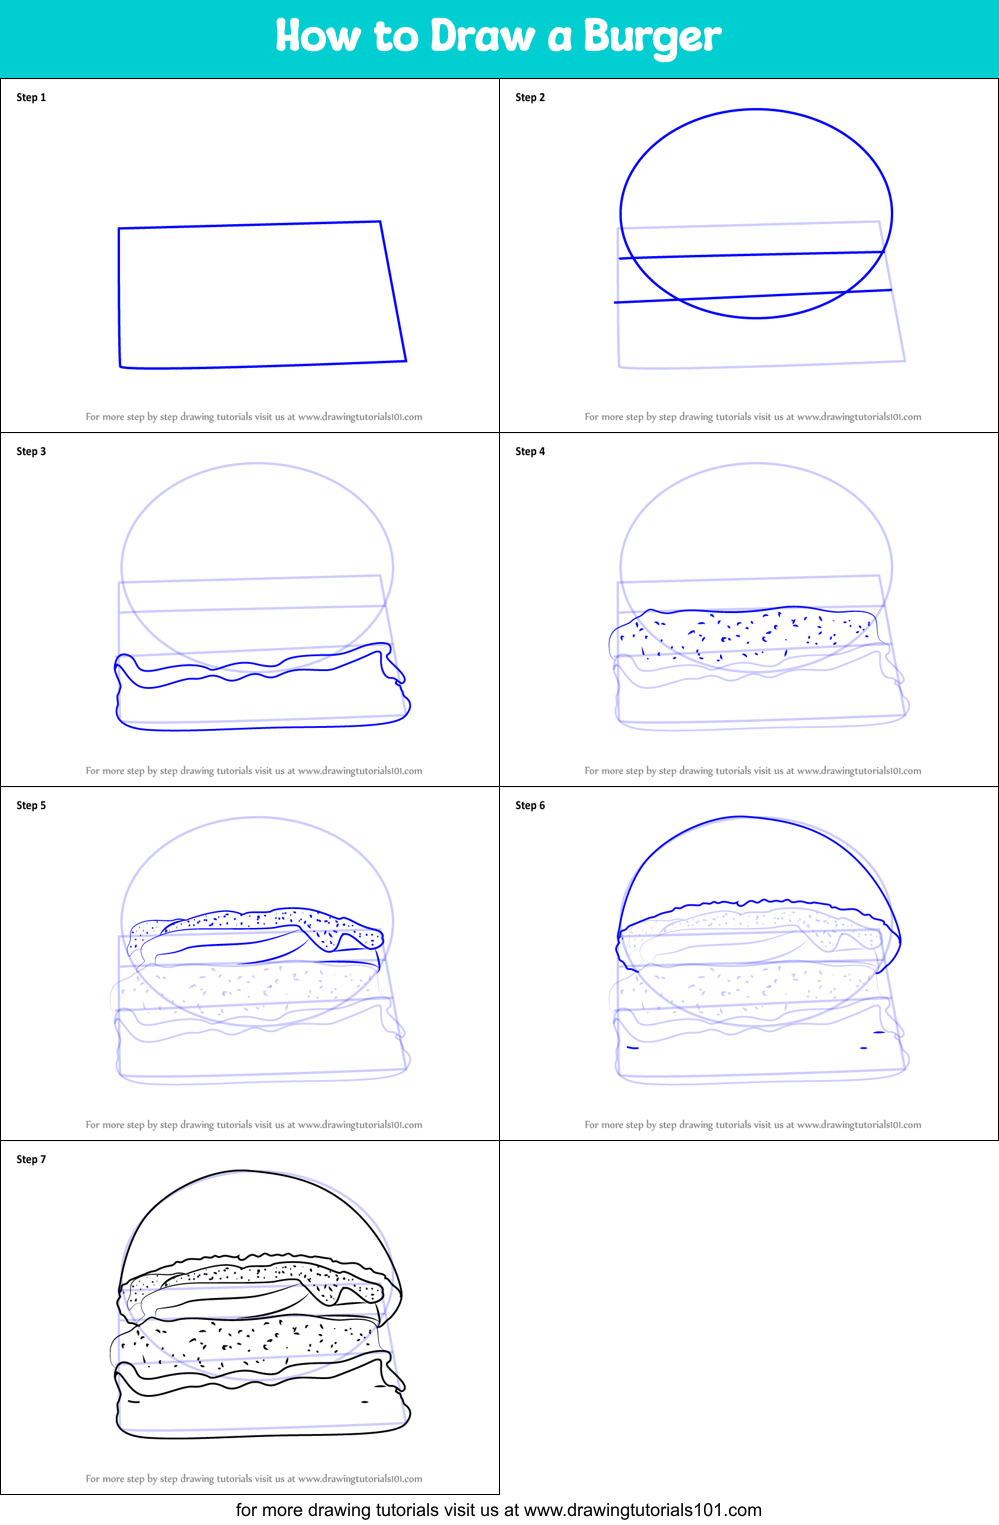 How to Draw a Burger printable step by step drawing sheet